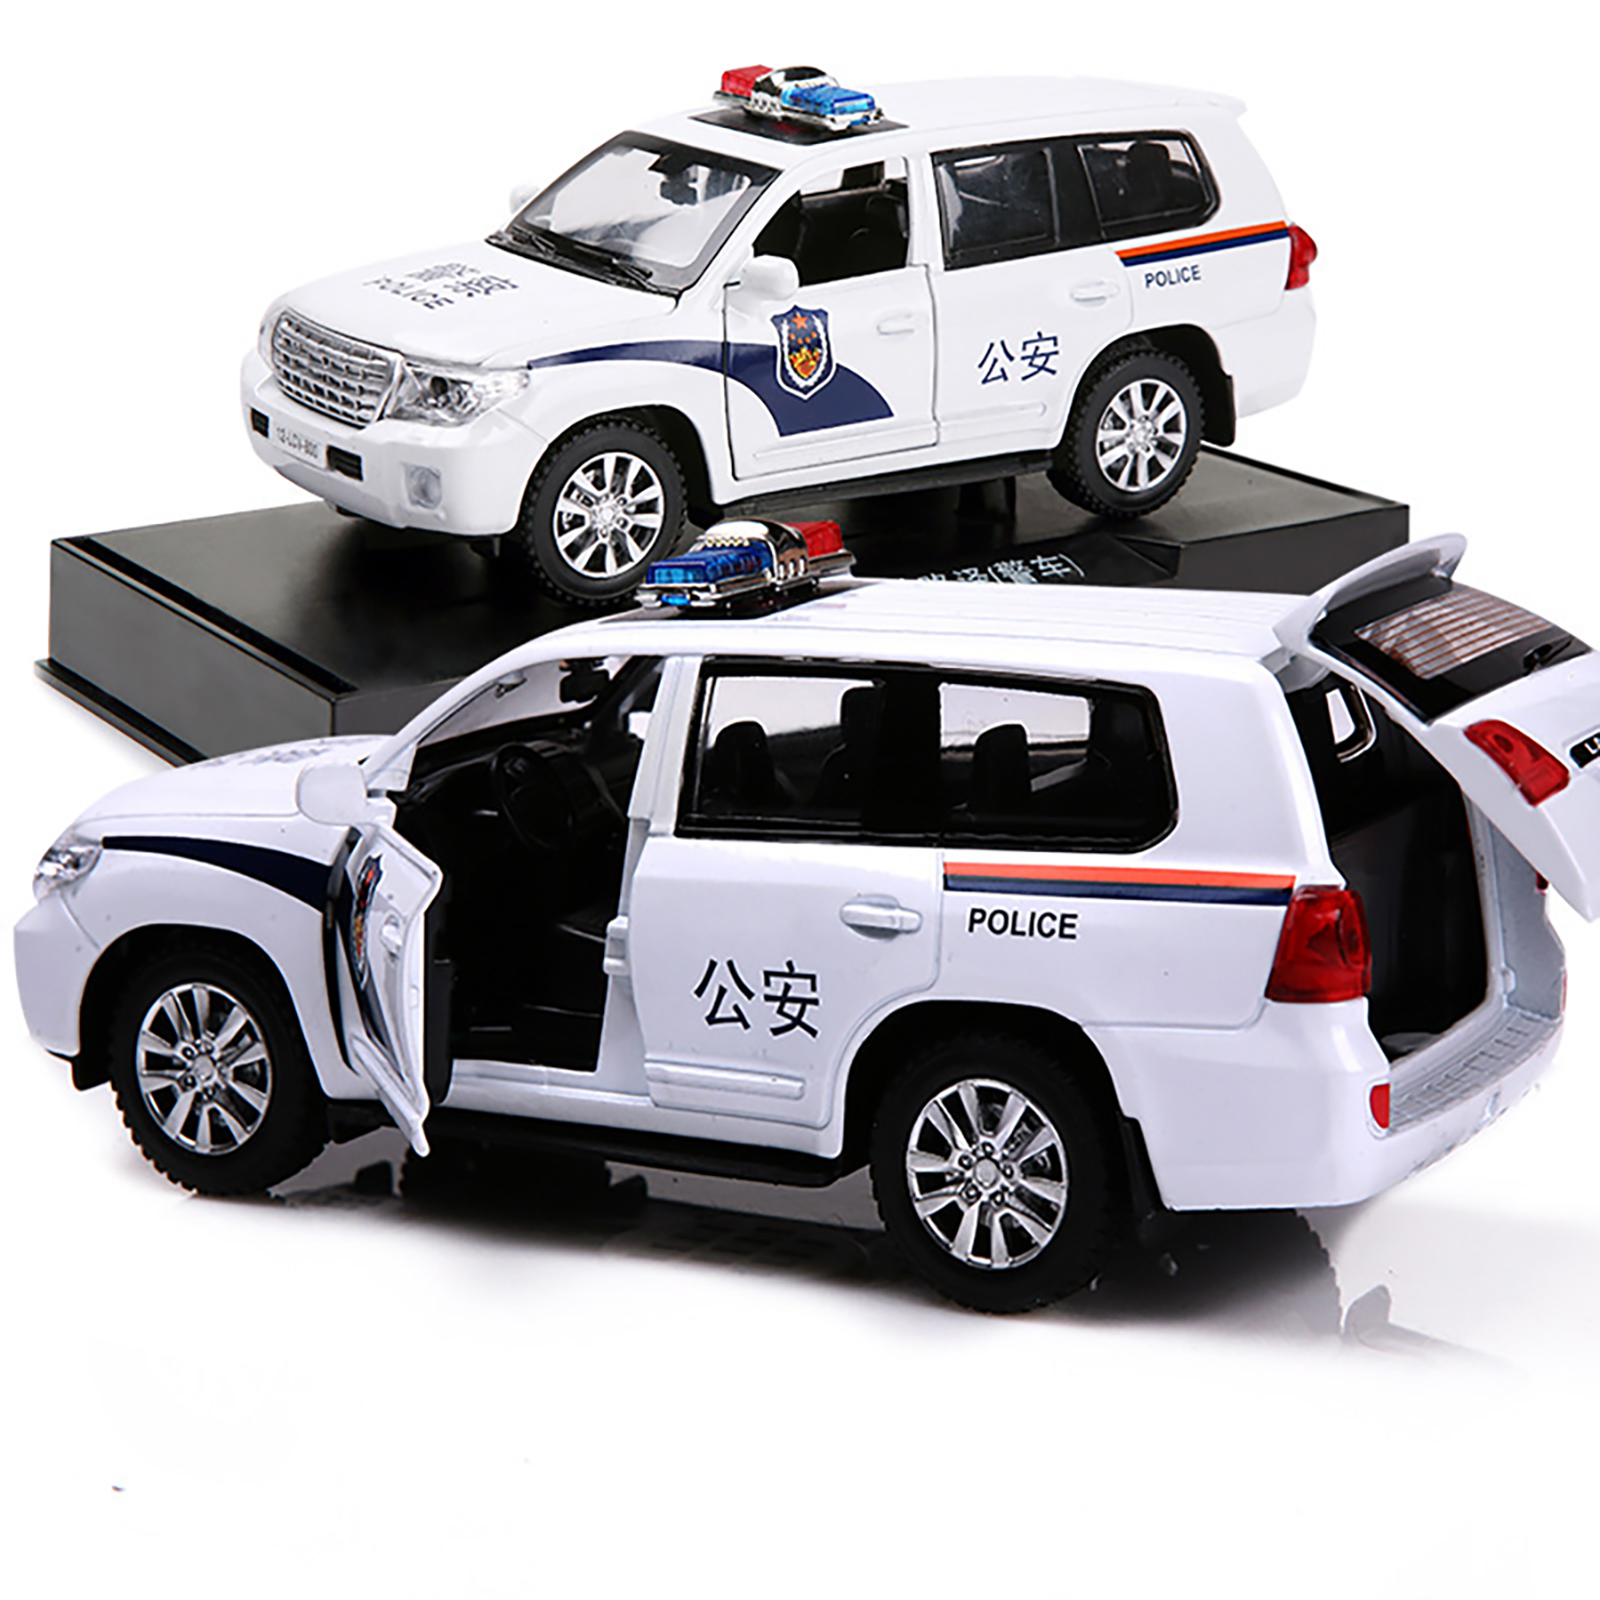 Simulation Alloy Police Car With Light Sound Openable Door Diecast Pull Back Vehicle Model With Base Birthday Xmas Gifts For Kids